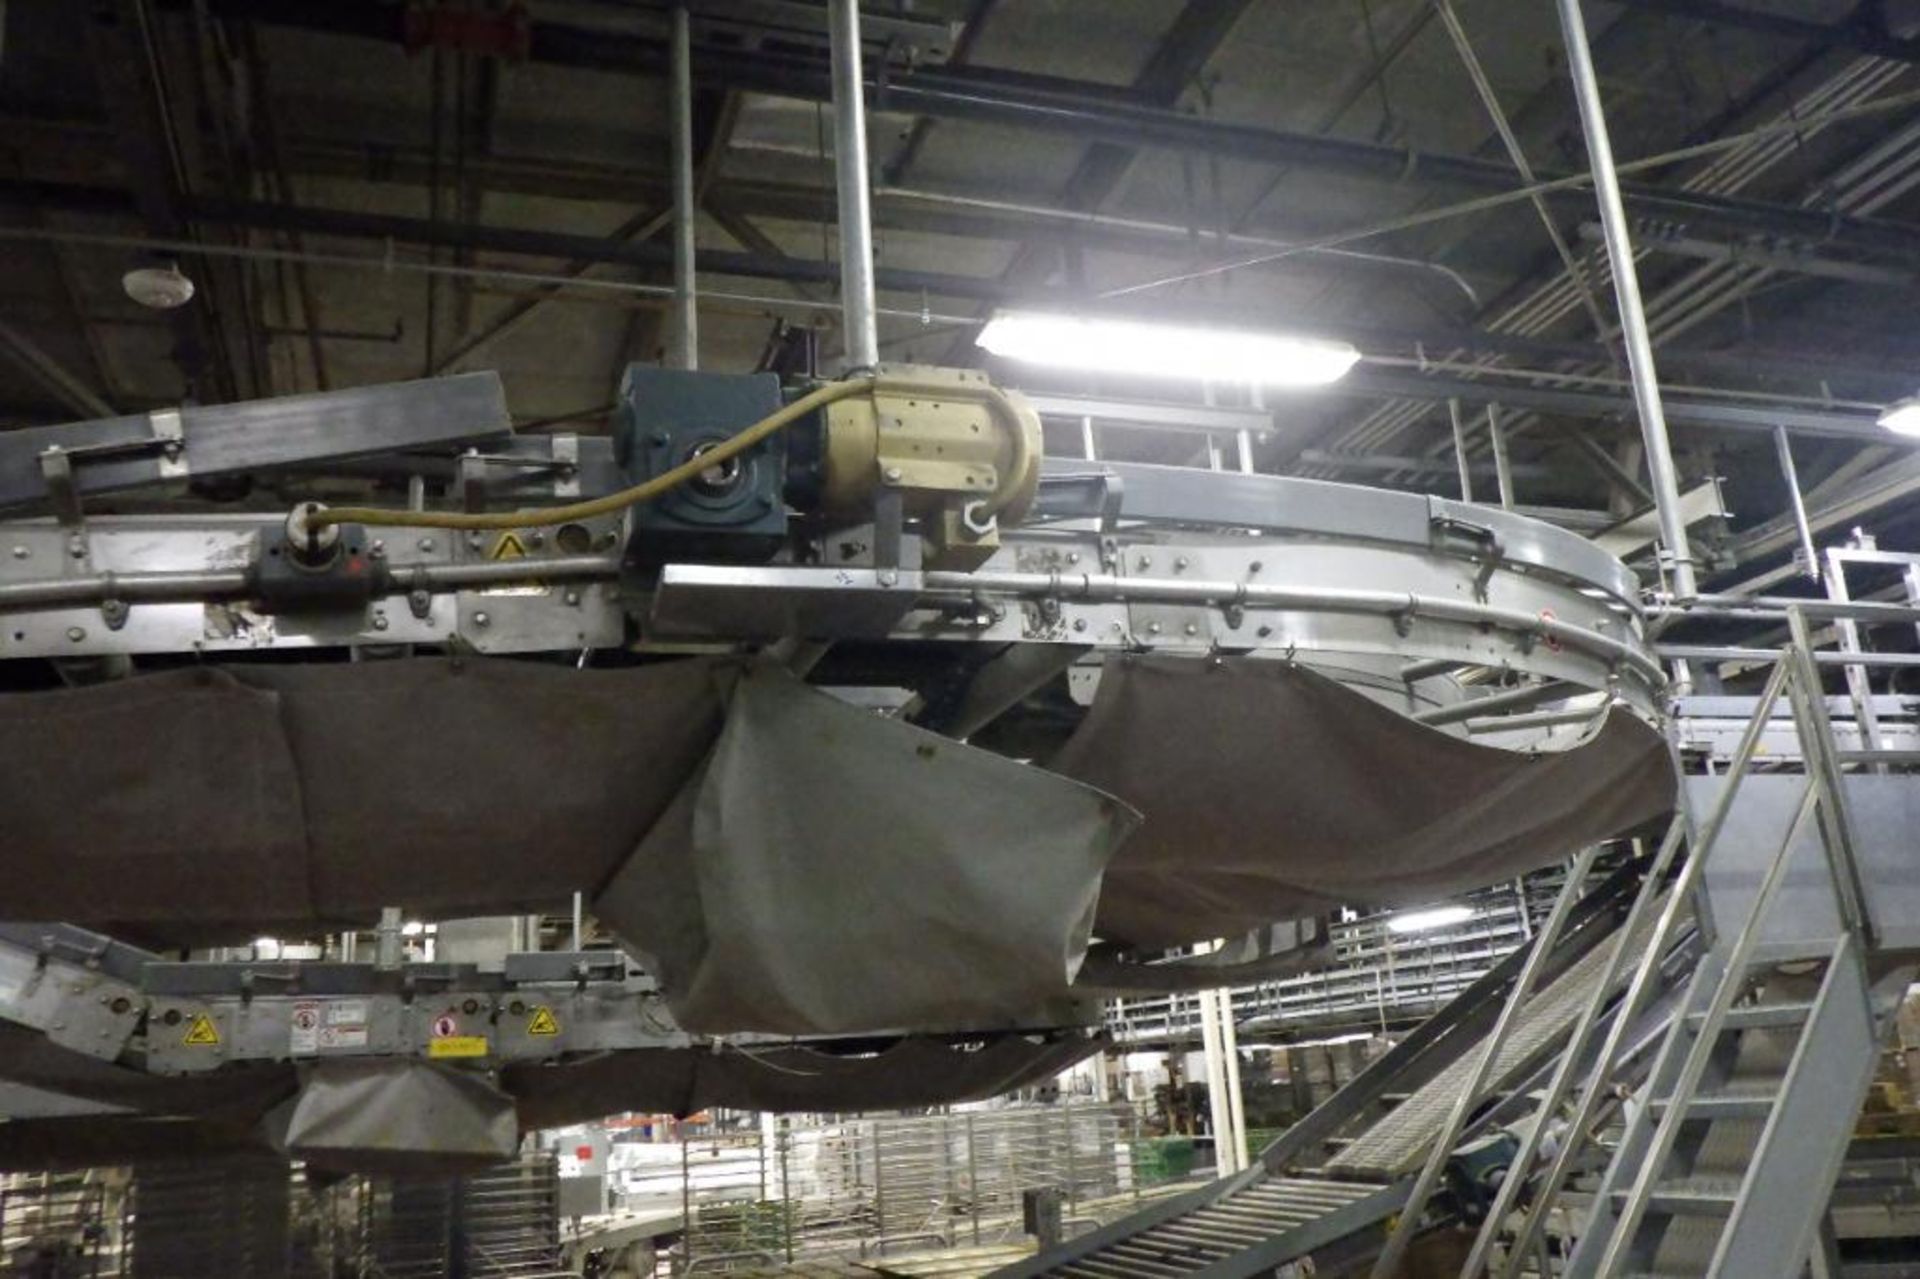 Stewart systems empty pan conveyor - Image 22 of 27